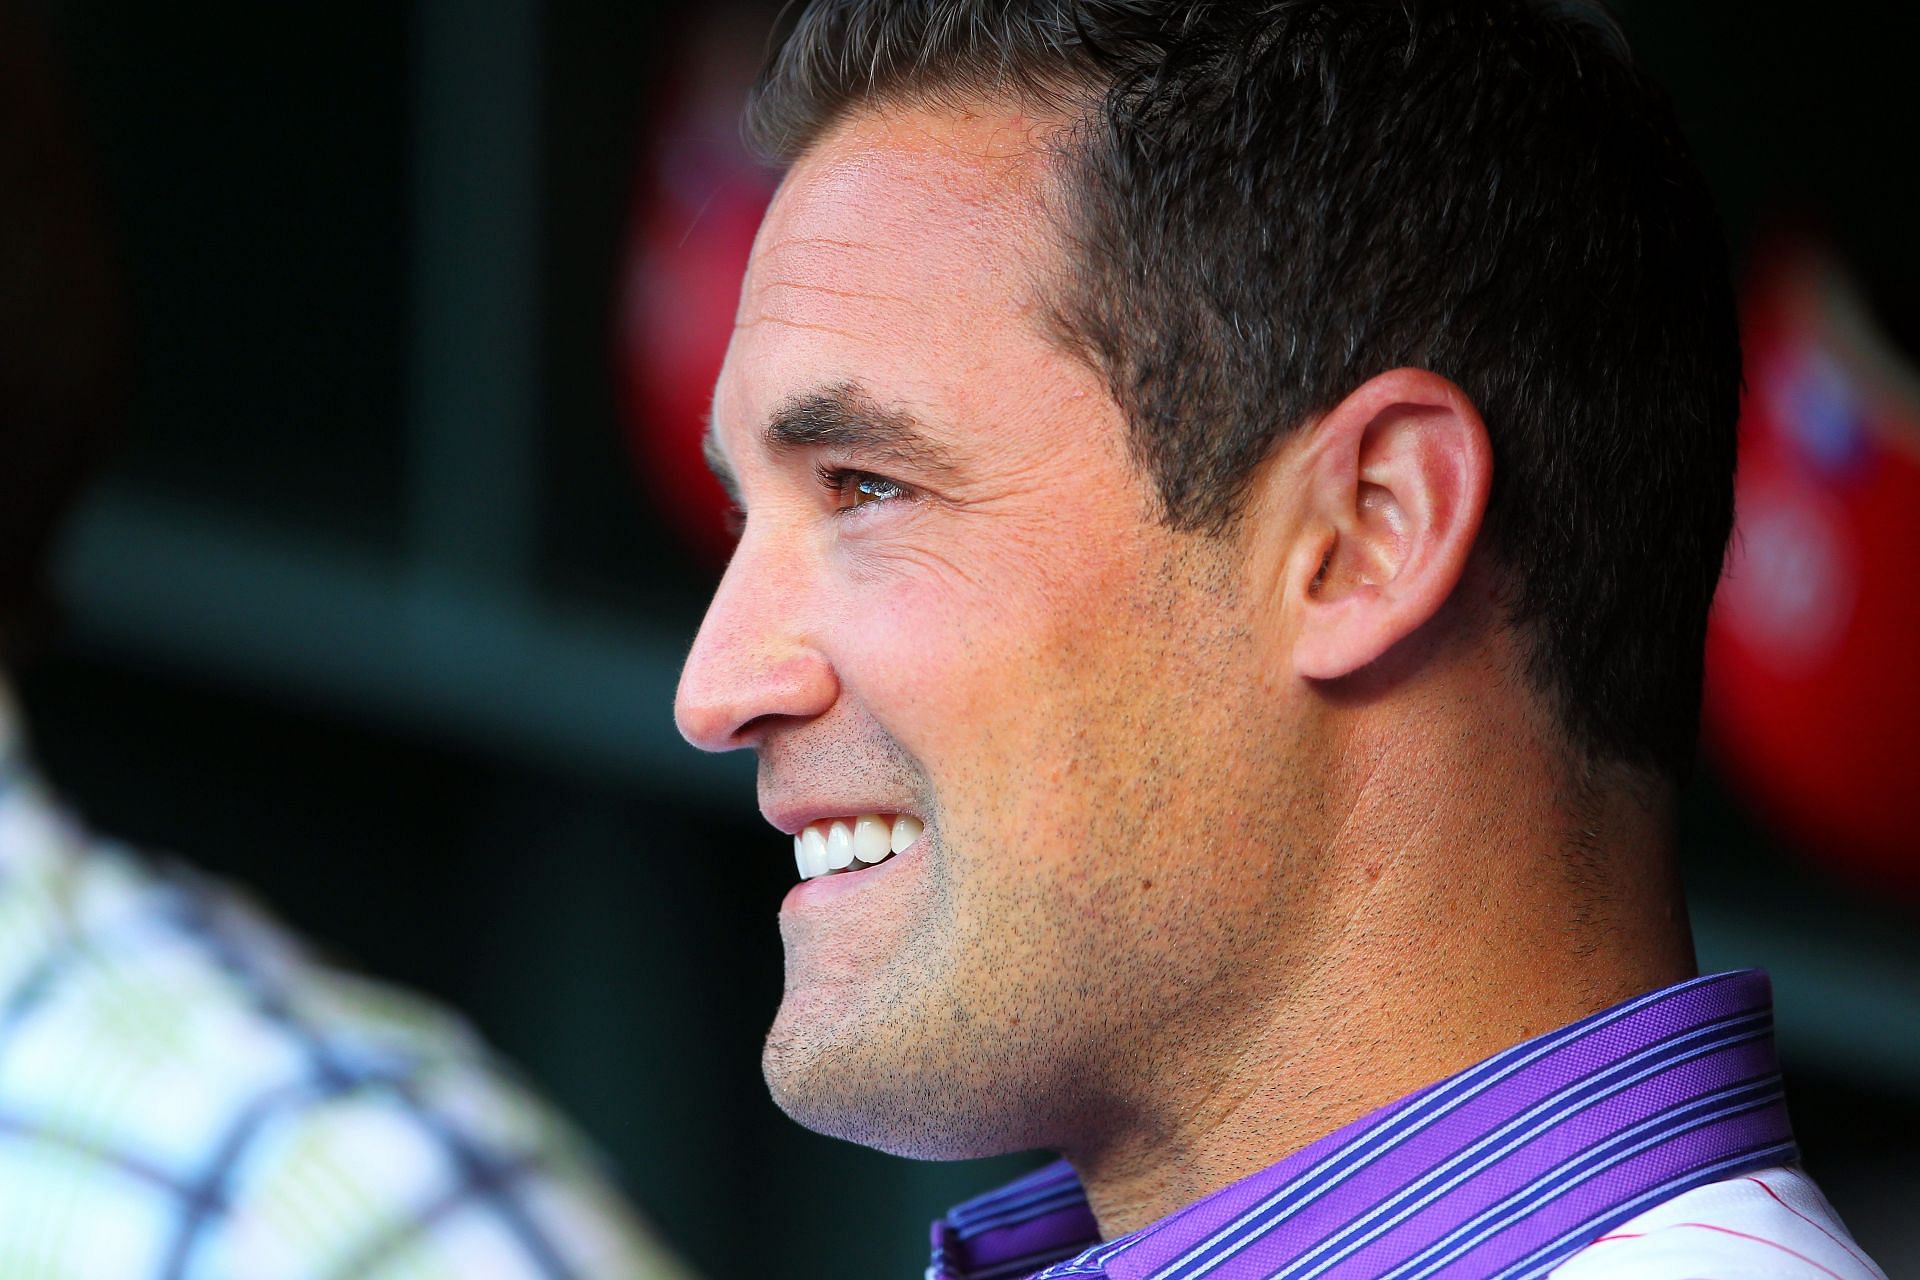 Pat Burrell To Retire As a Phillie - The Good Phight